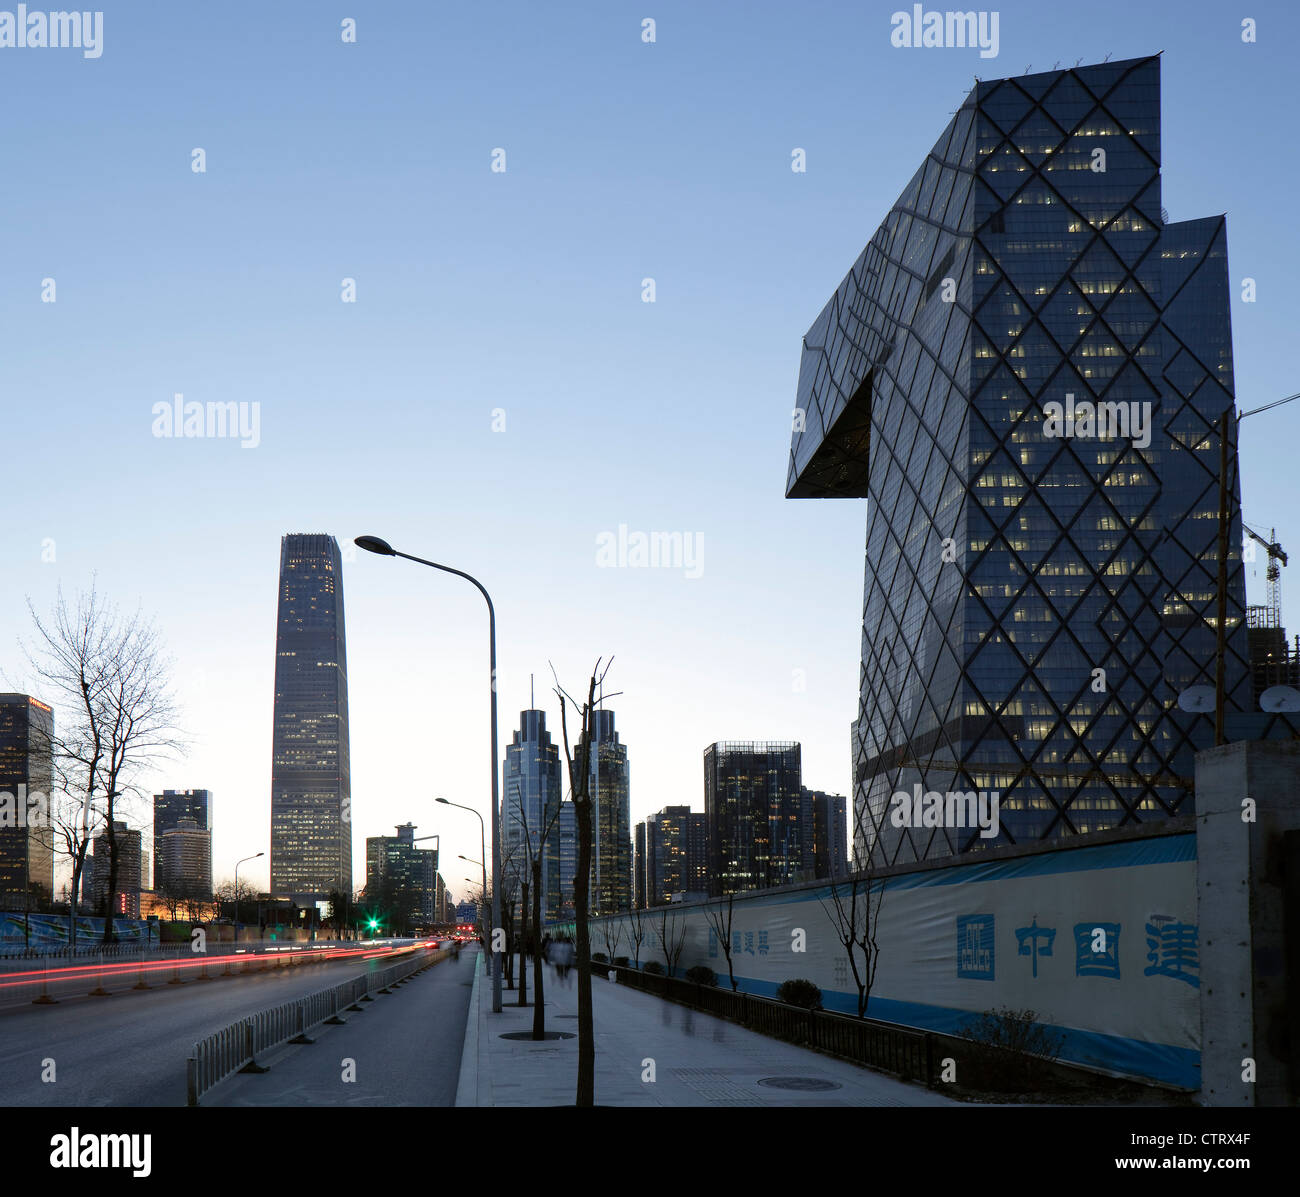 General Views Of The Cbd (Central Business District) Of Beijing Mostly At Dusk. Stock Photo